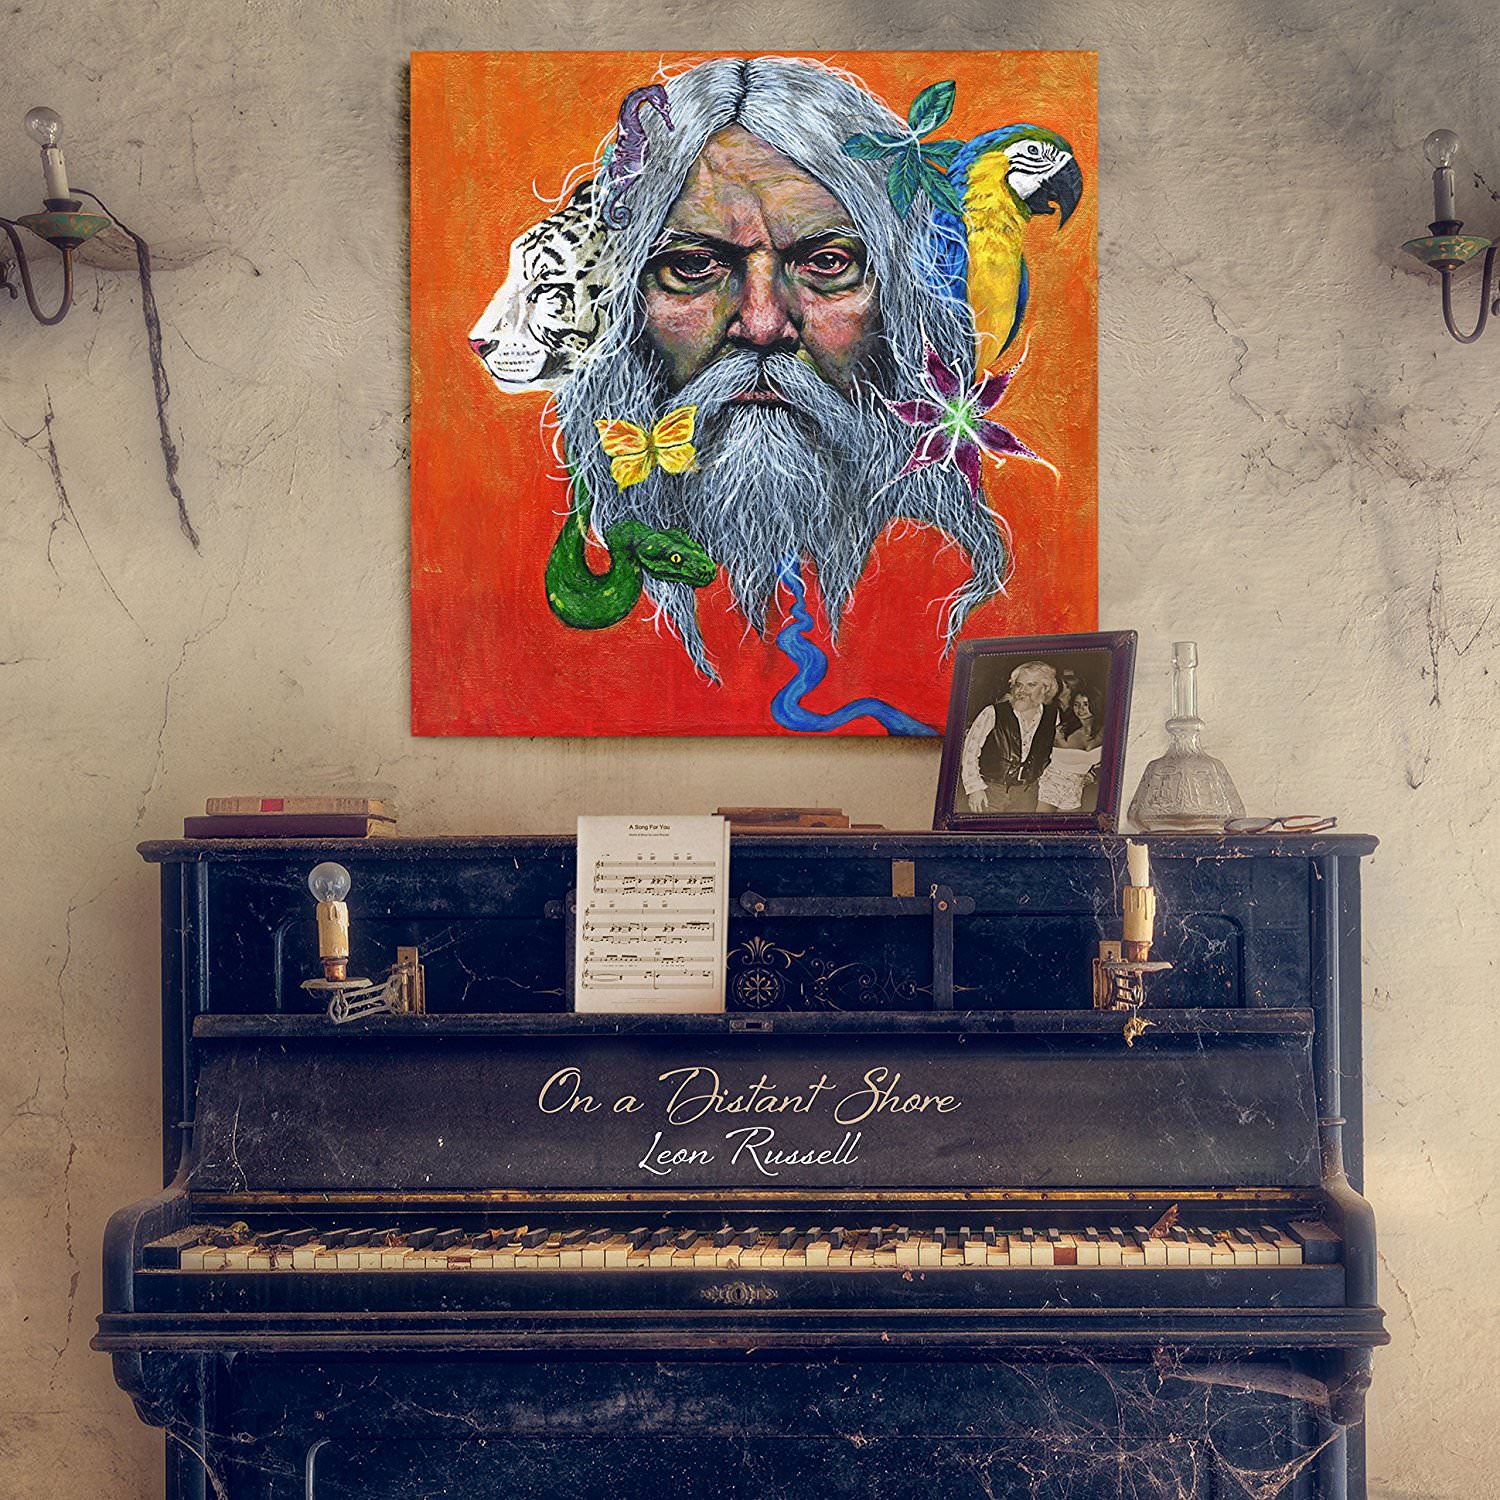 Leon Russell - On a Distant Shore (2017) [FLAC 24bit/44,1kHz]